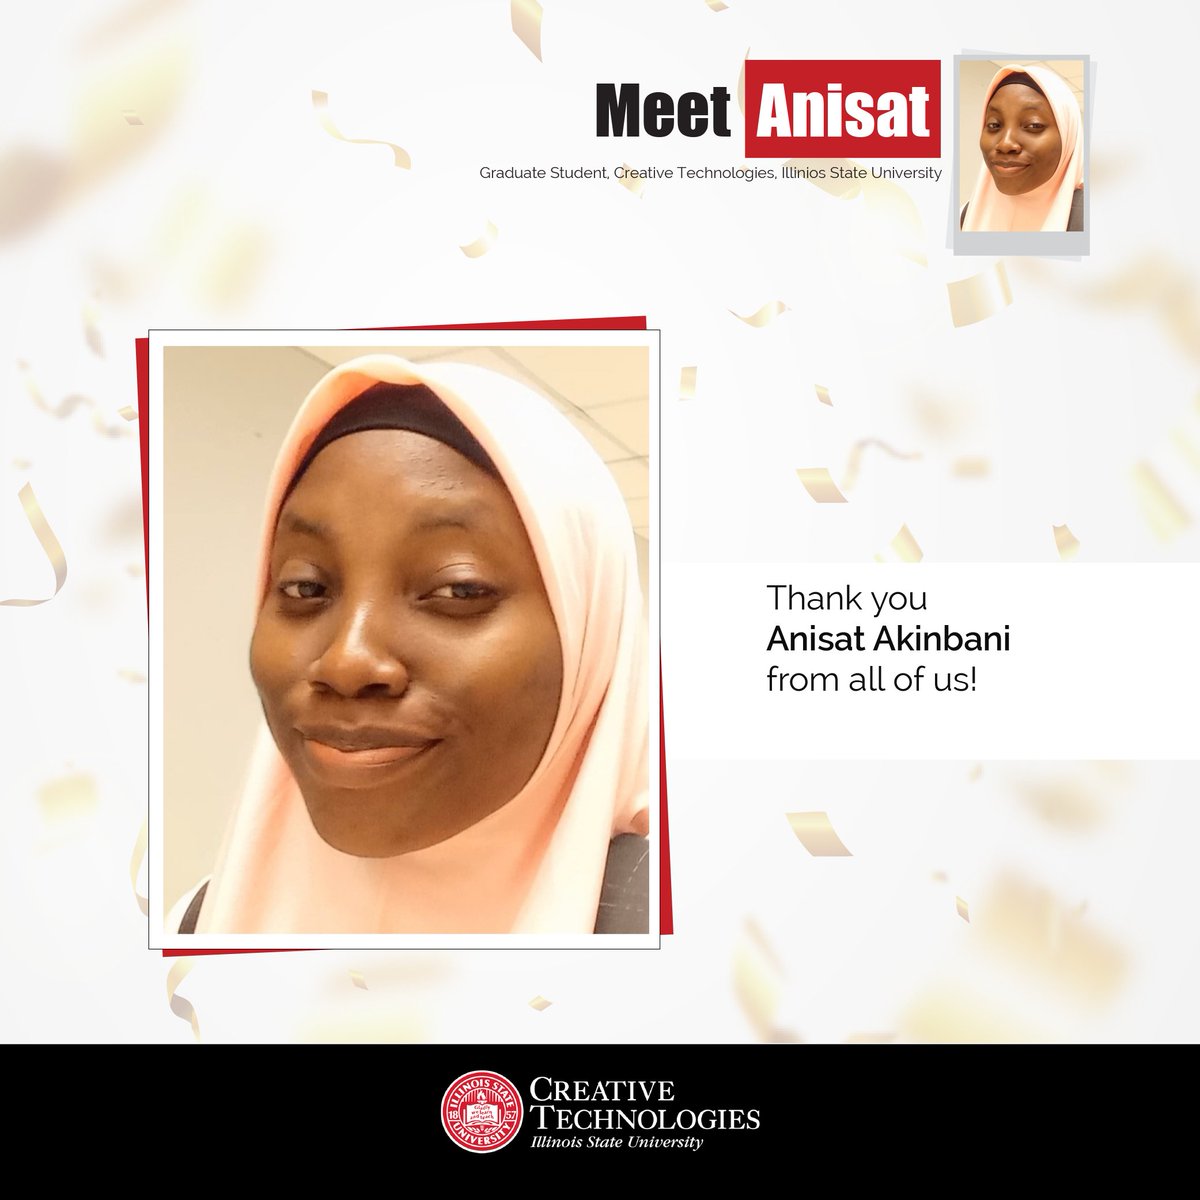 Meet Anisat Ahmed, one of our CTK Grad students.
She is an amazing front end engineer and we are glad she chose our program.

#CTKStudents #ctkisu #CreativeTechmologies #IllinoisStateUniversity #CollegeStudents #StudentSpotlight #WomenInTech